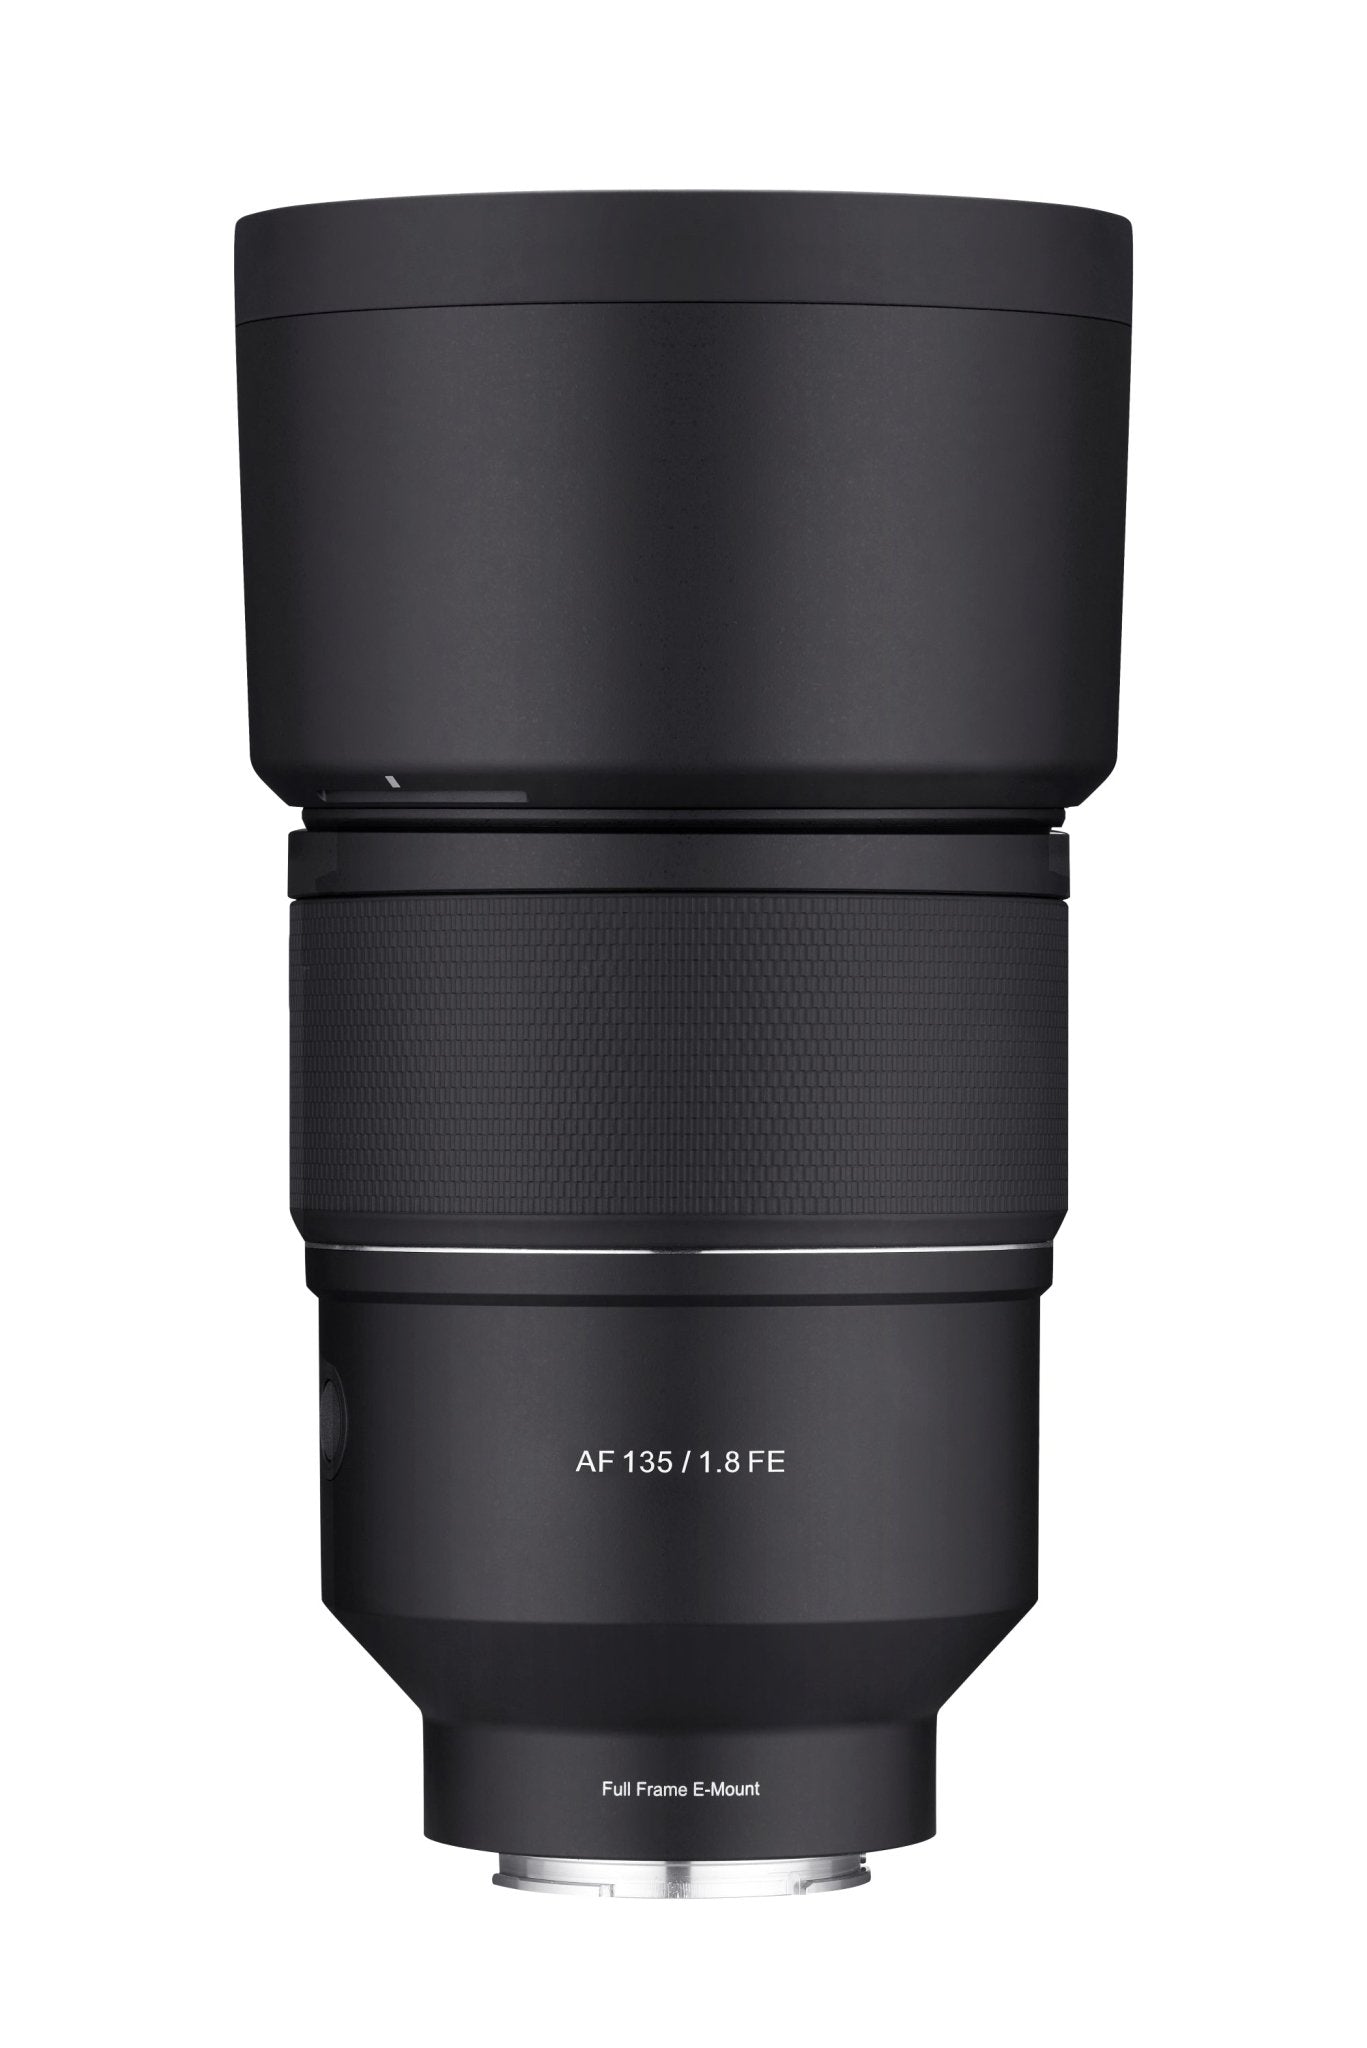 Rokinon 135mm F1.8 AF Full Frame Telephoto Sony E (No sales tax, free standard shipping)